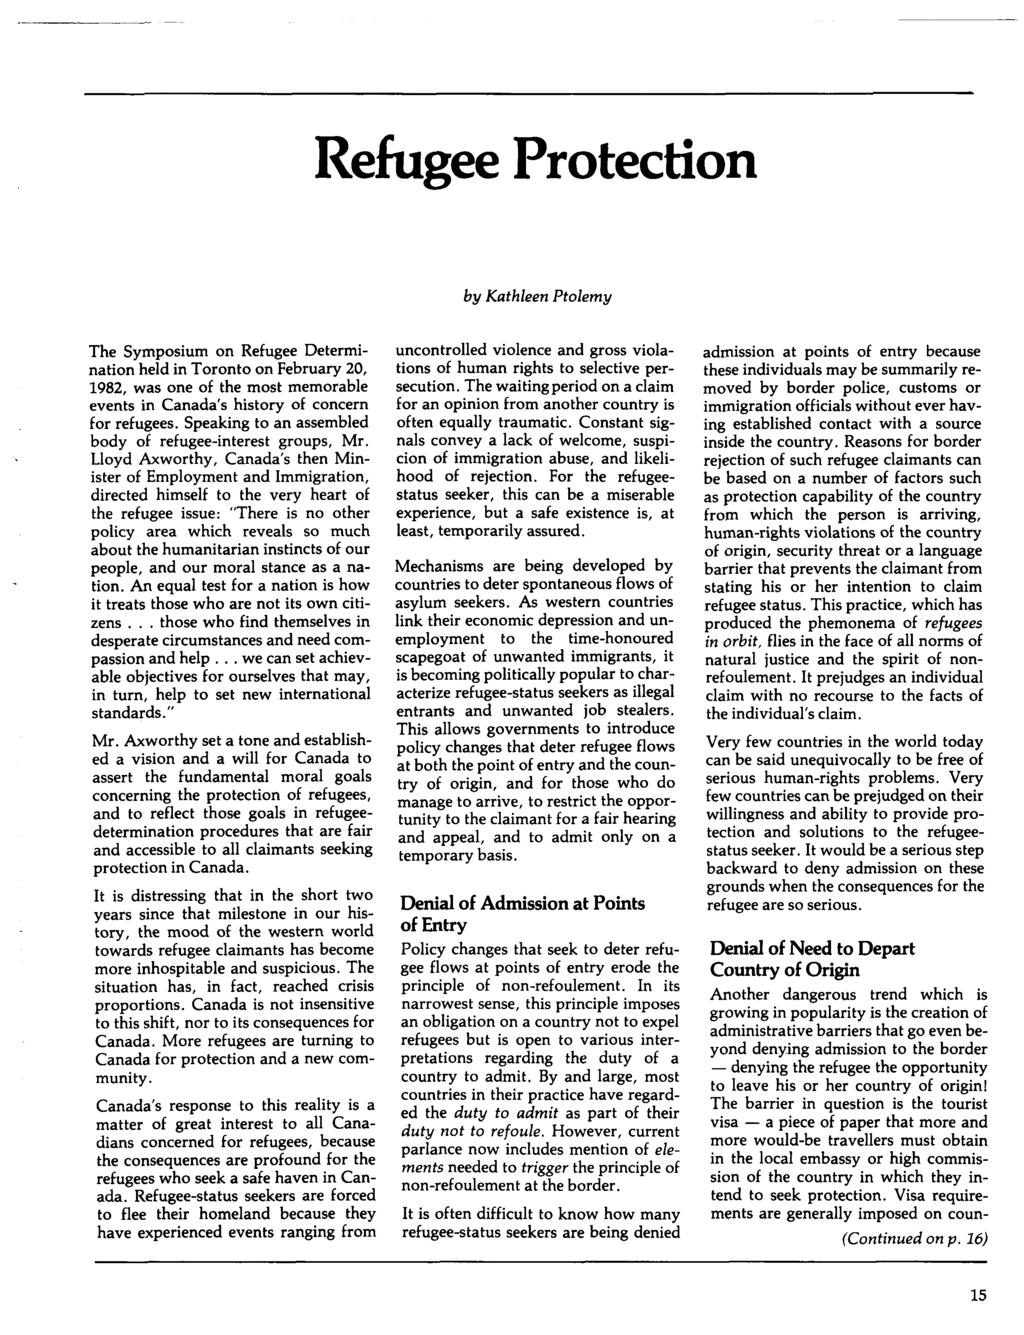 Refugee Protection by Kathleen Ptolemy The Symposium on Refugee Determination held in Toronto on February 20, 1982, was one of the most memorable events in Canada's history of concern for refugees.